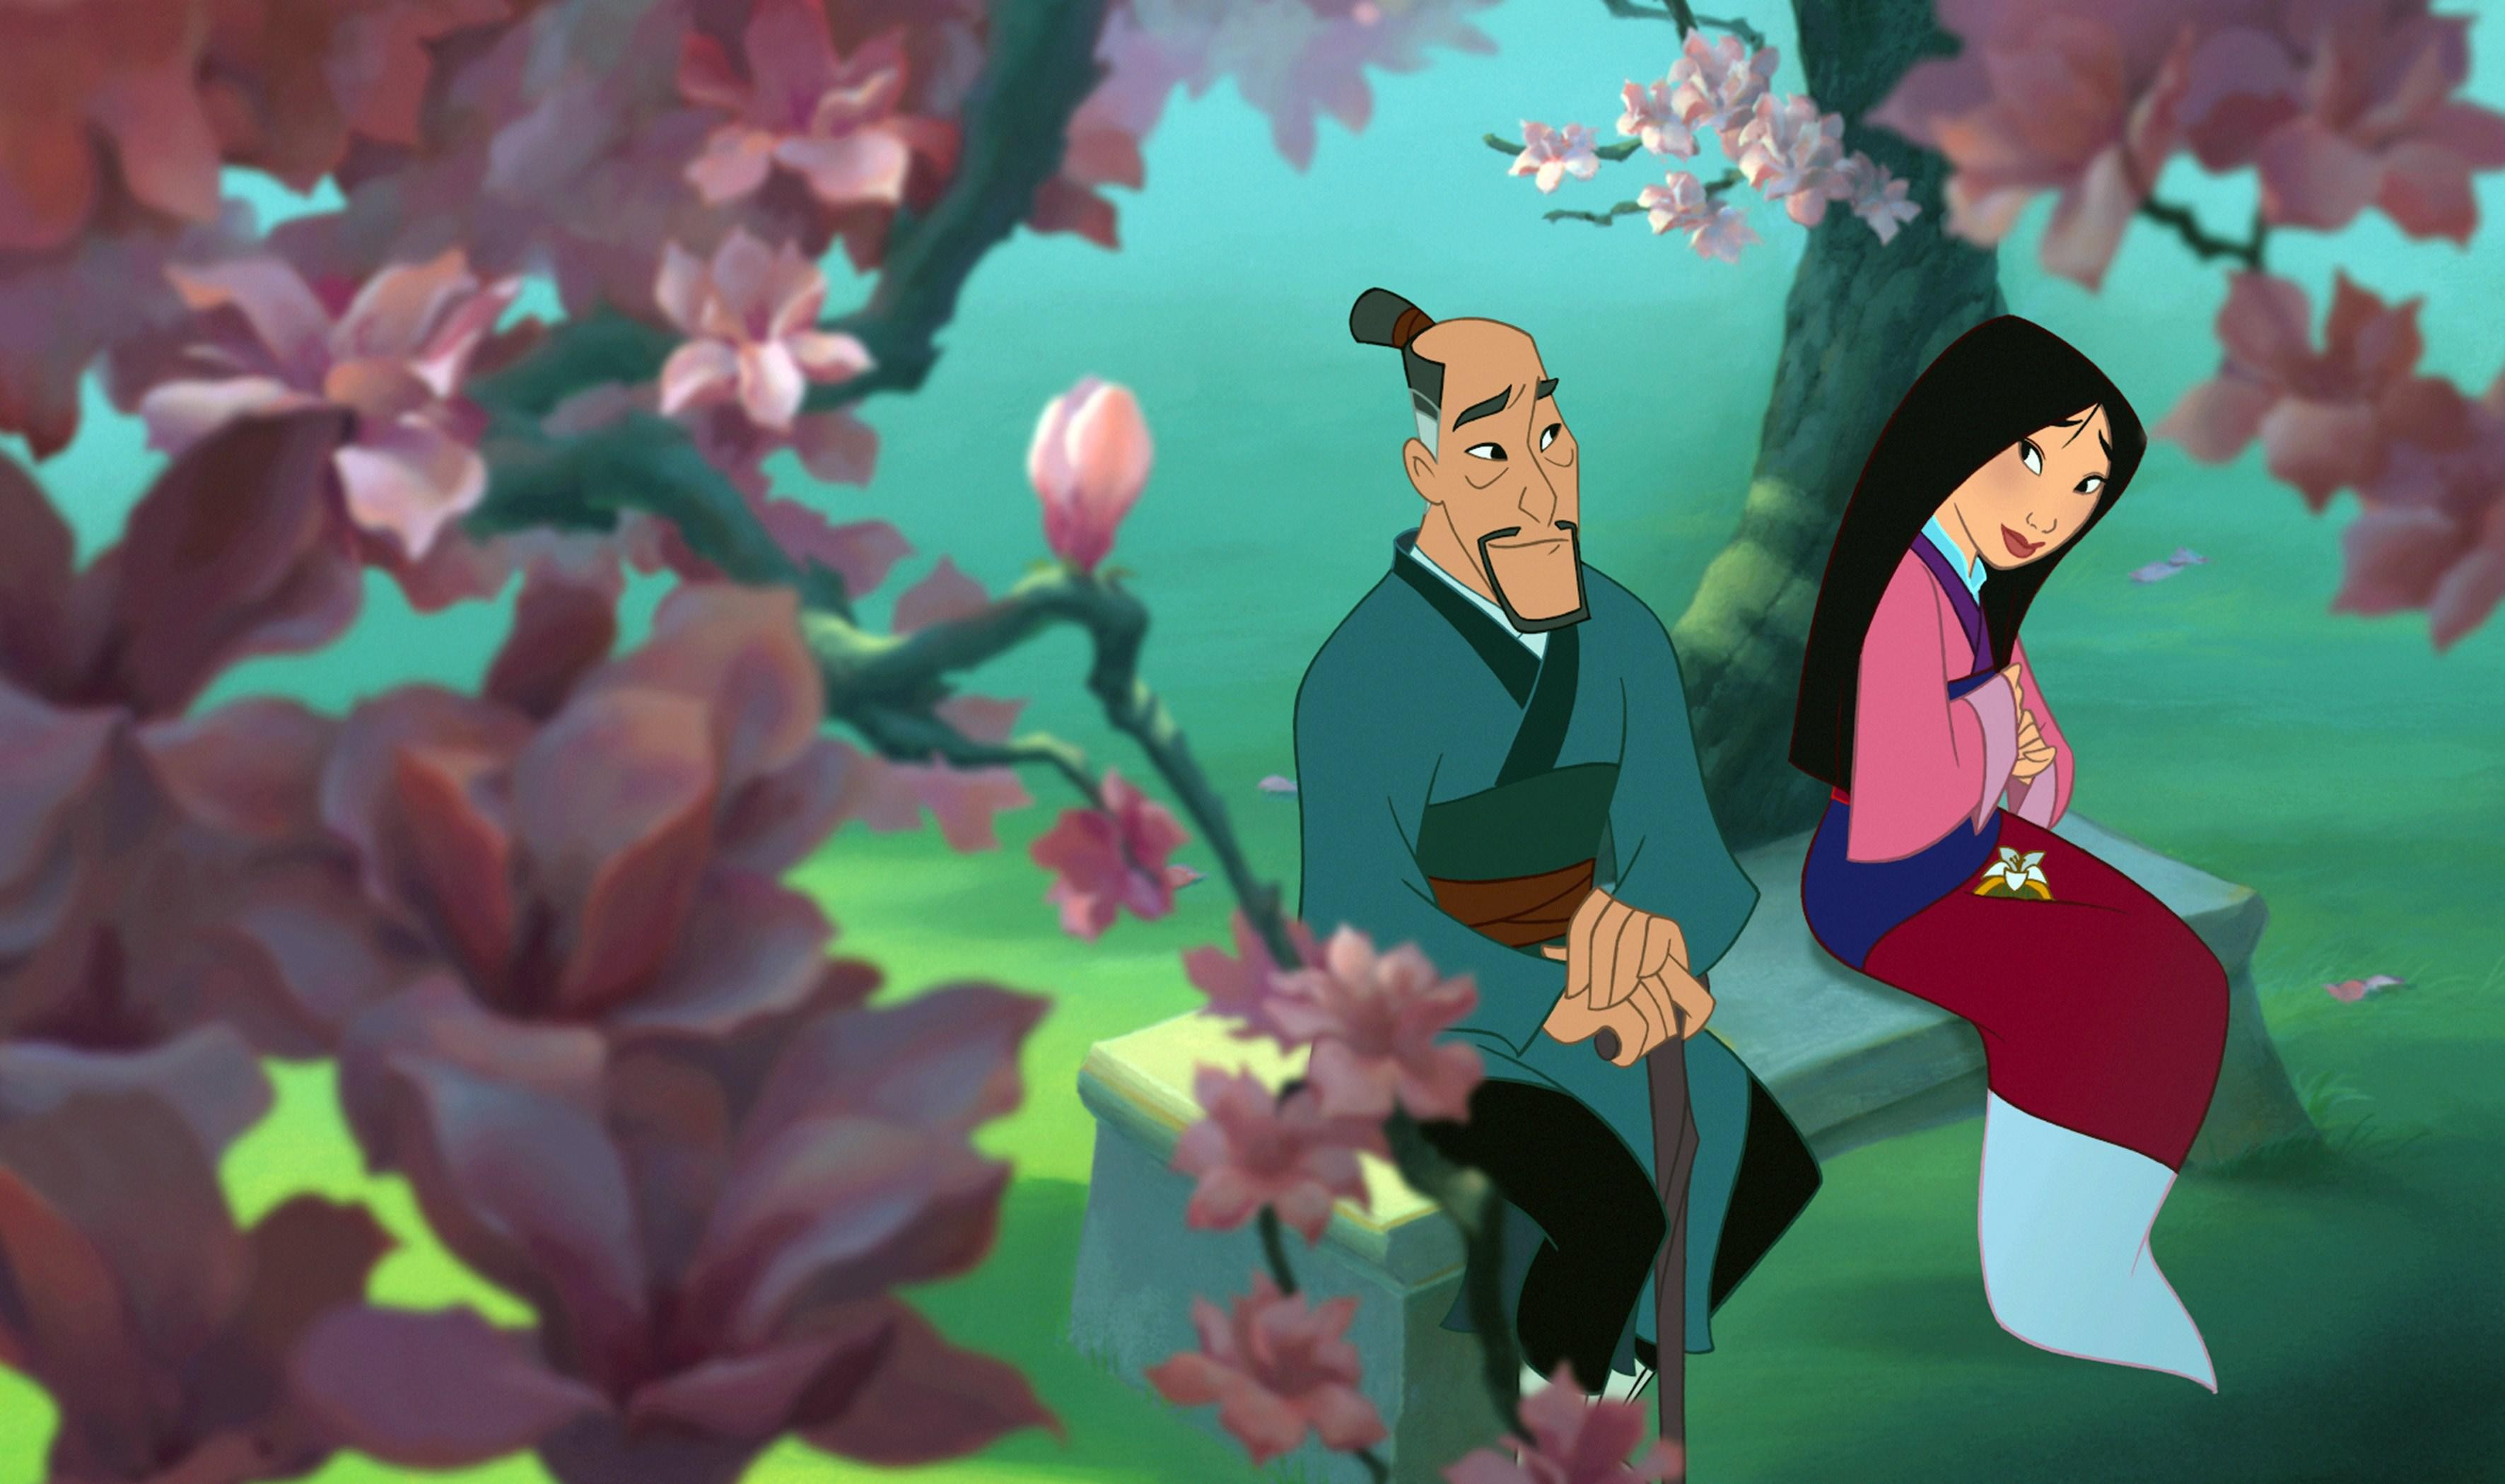 Disney has not 'butchered' Mulan – the Chinese tale of filial love has been  subject to many interpretations | South China Morning Post